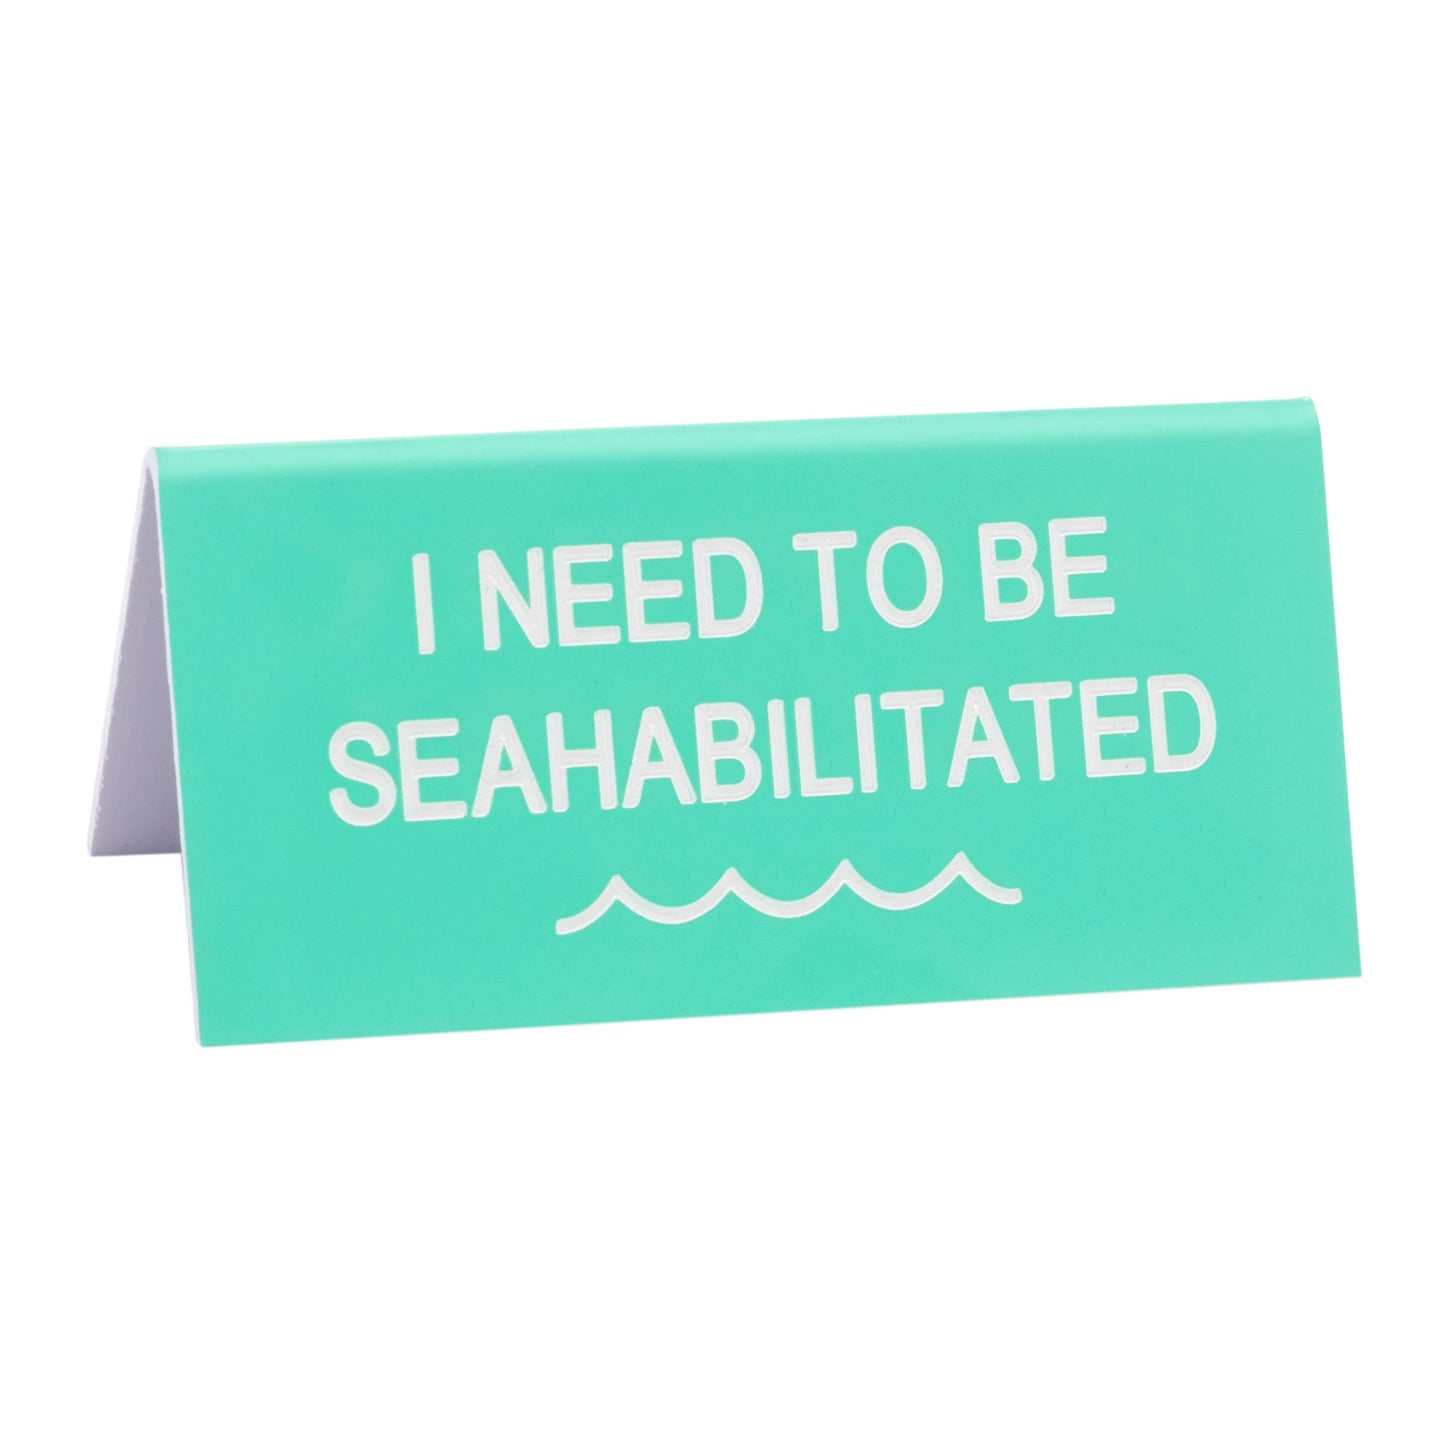 Seahabilitated Small Sign